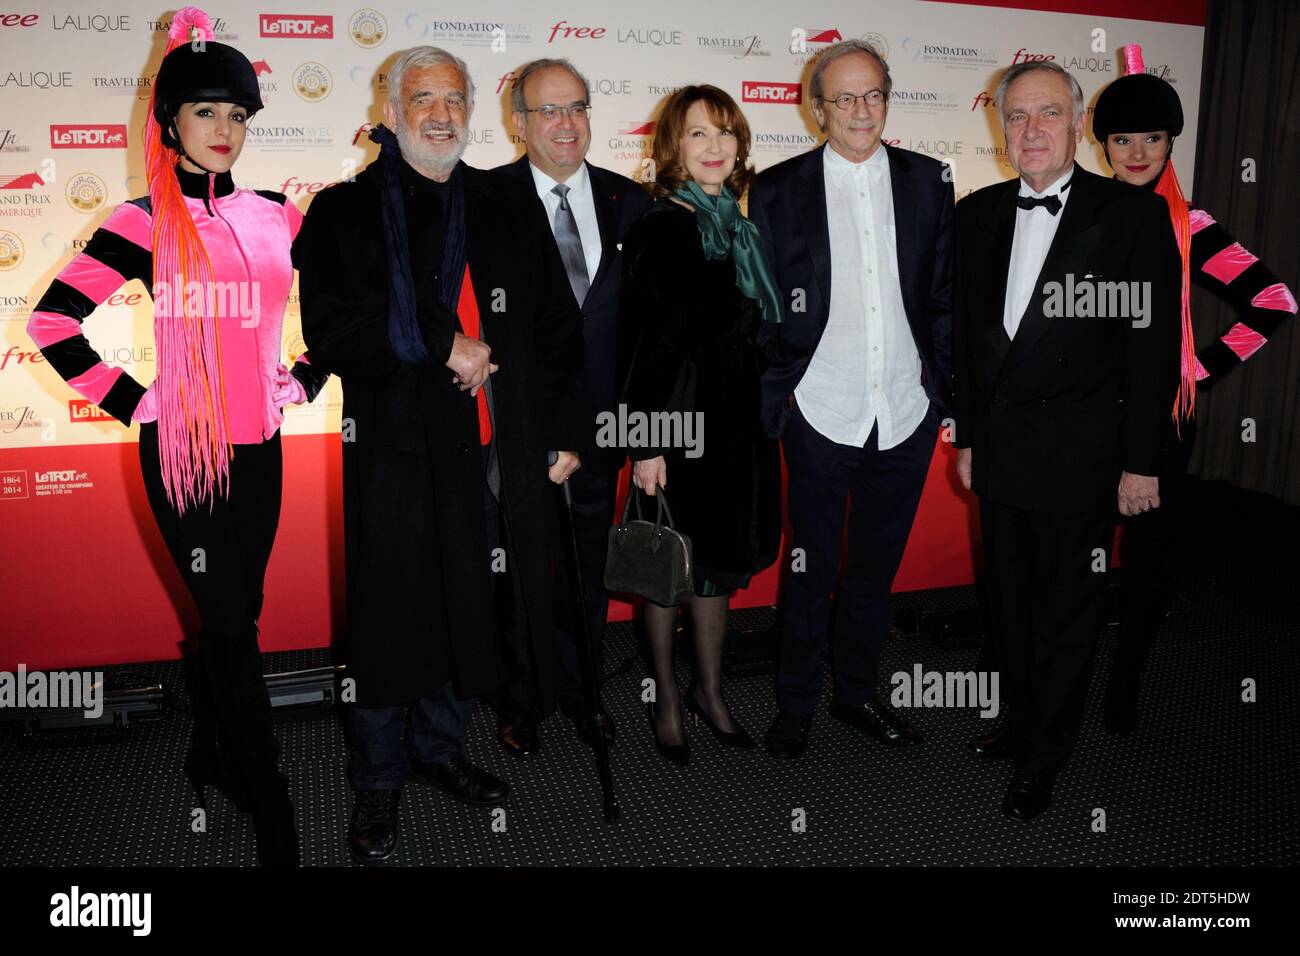 Jean-Paul Belmondo attending the 93th Grand Prix d'Amerique gala diner held  at the Pavilllon d'Armenonville in Paris, France on January 25, 2014. Photo  by Alban WytersABACAPRESS.COM Stock Photo - Alamy